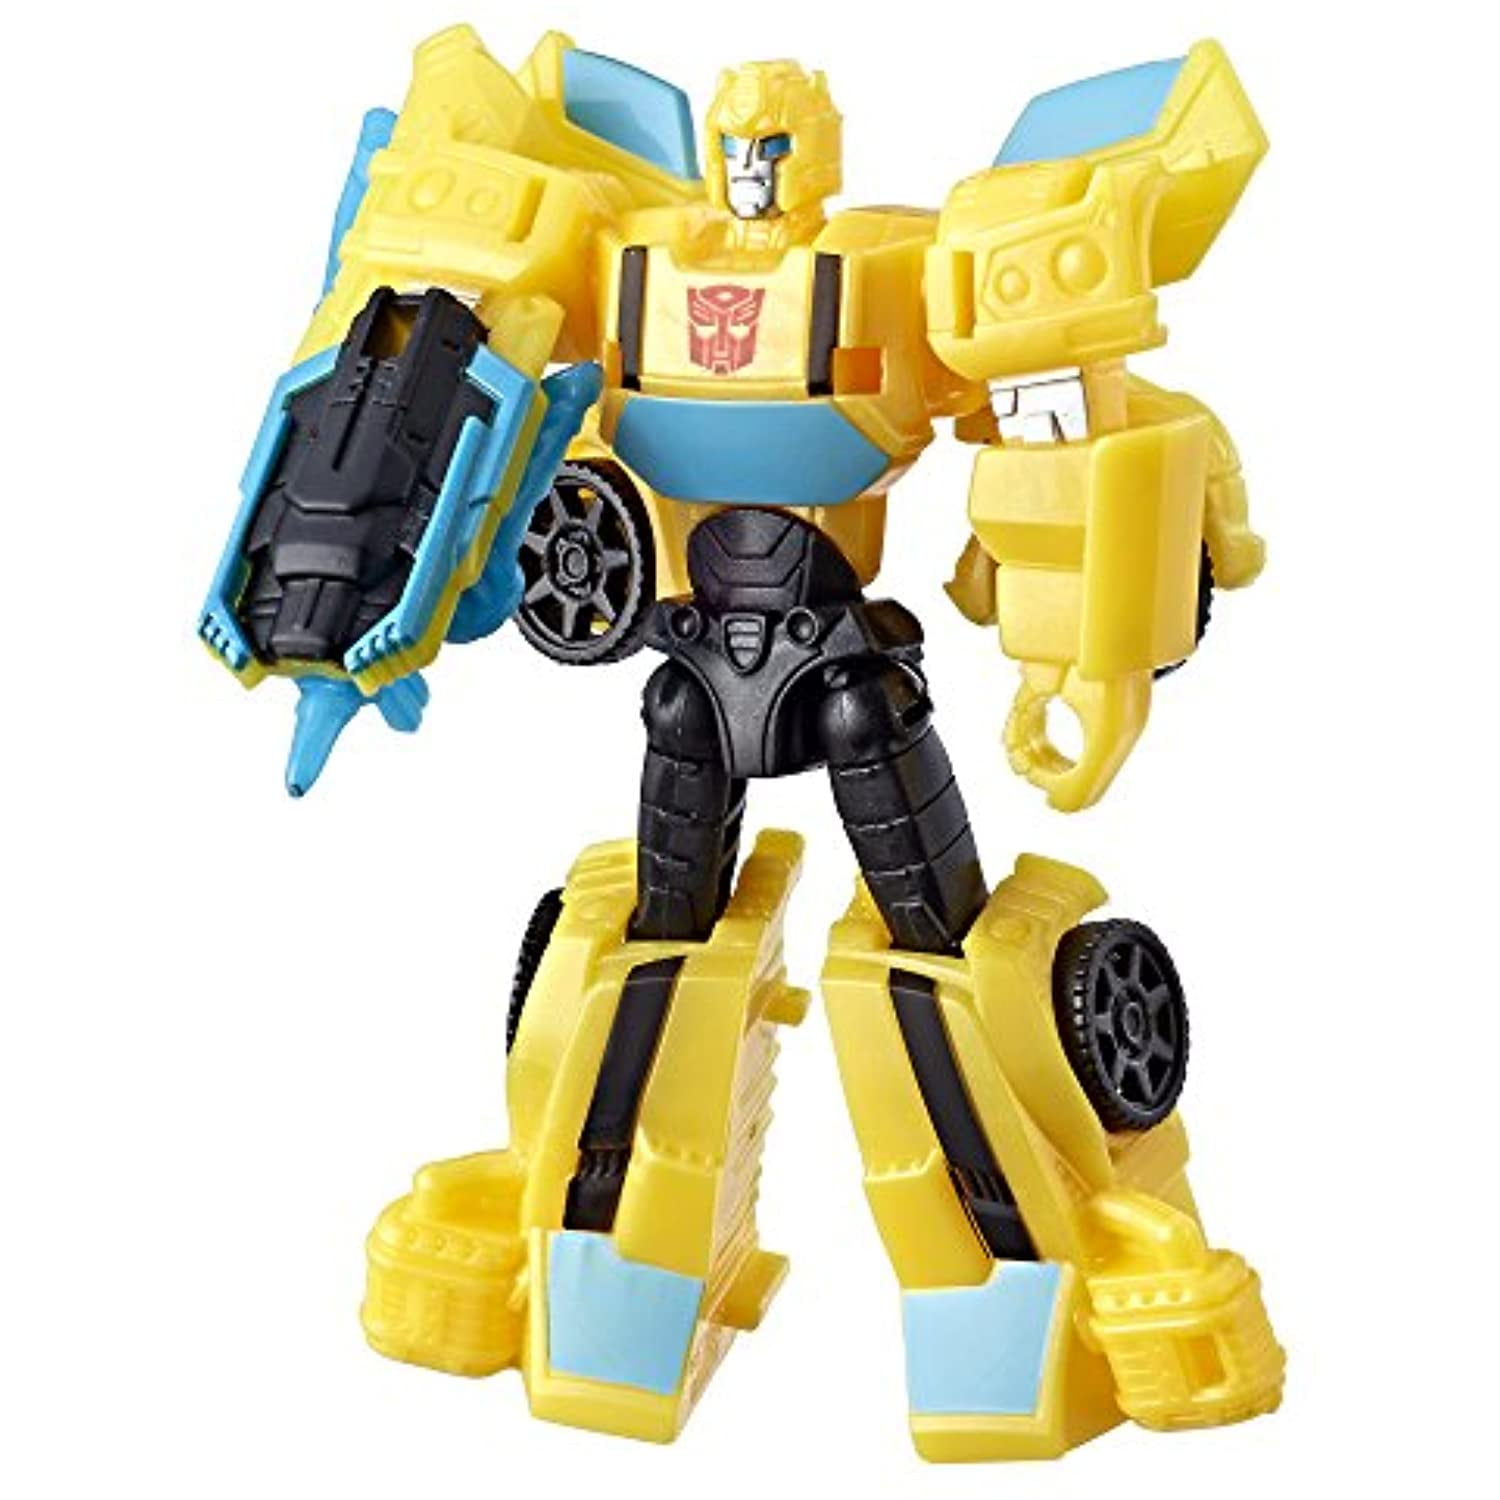 Transformers Action Figure Details about   Hasbro Transformers Rescue Bots Bumblebee Yello 